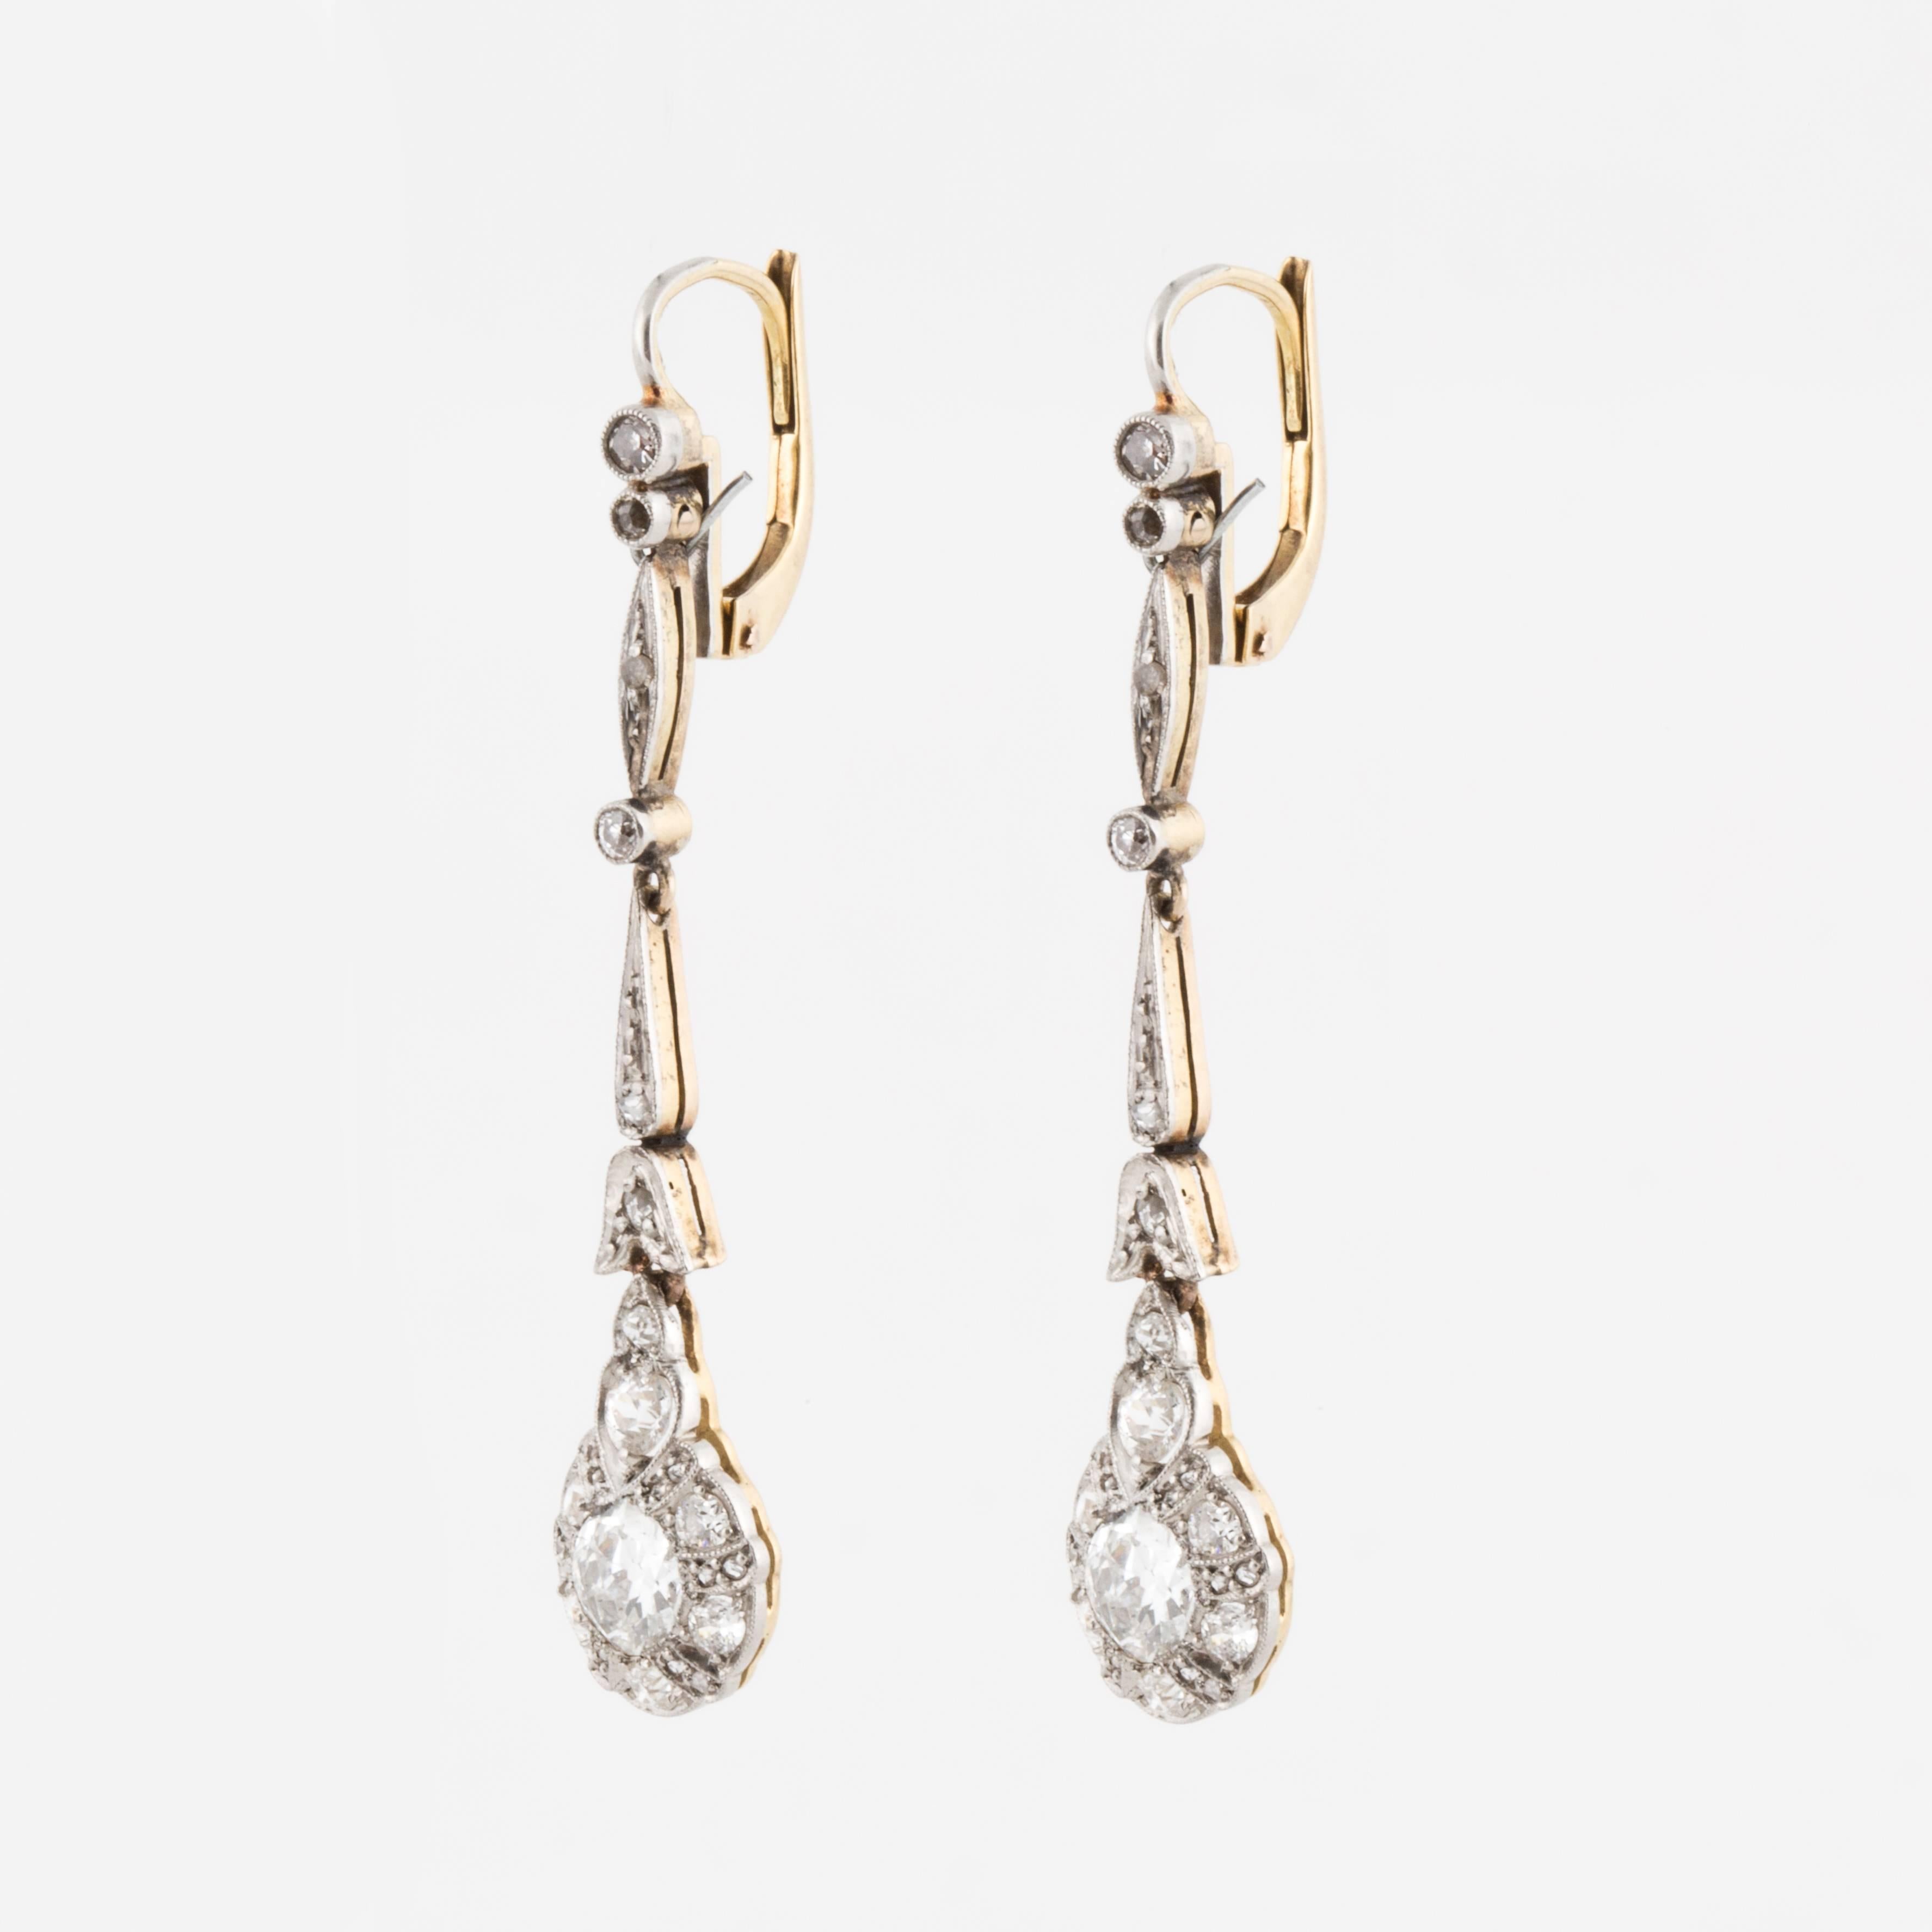 Diamond drop earrings made in both platinum and 18K yellow gold, set with old European-cut and rose-cut diamonds. The total diamond carat weight is 1.79, I-L color and VS1-SI2 clarity.  Measure 1-7/8 inches long and 3/8 inches wide at the bottom.